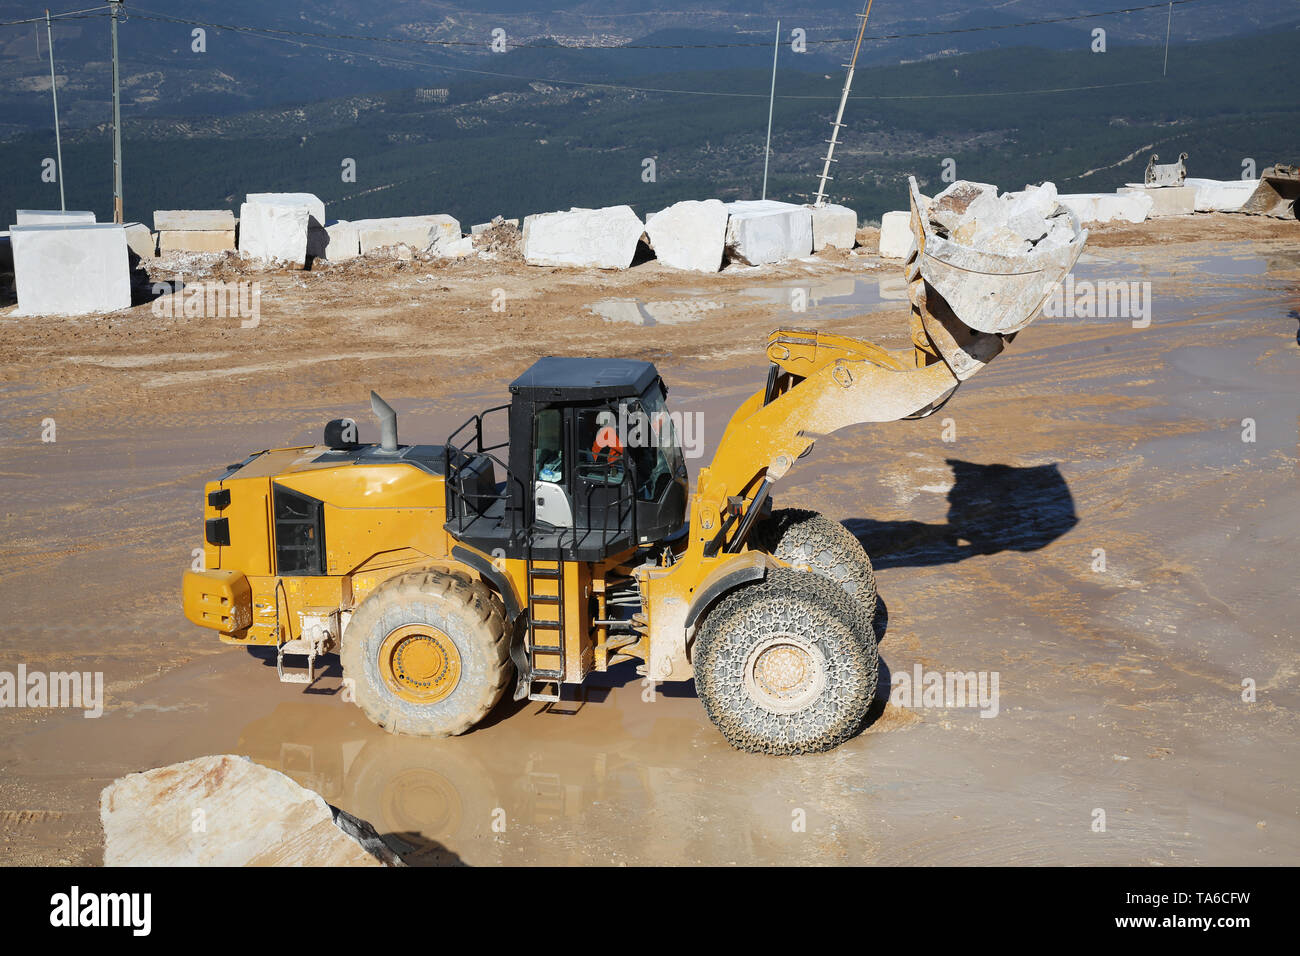 A big loader machine working on marble quarry. A loader loading marble block. Heavy machinery working on mining quarry. Stock Photo